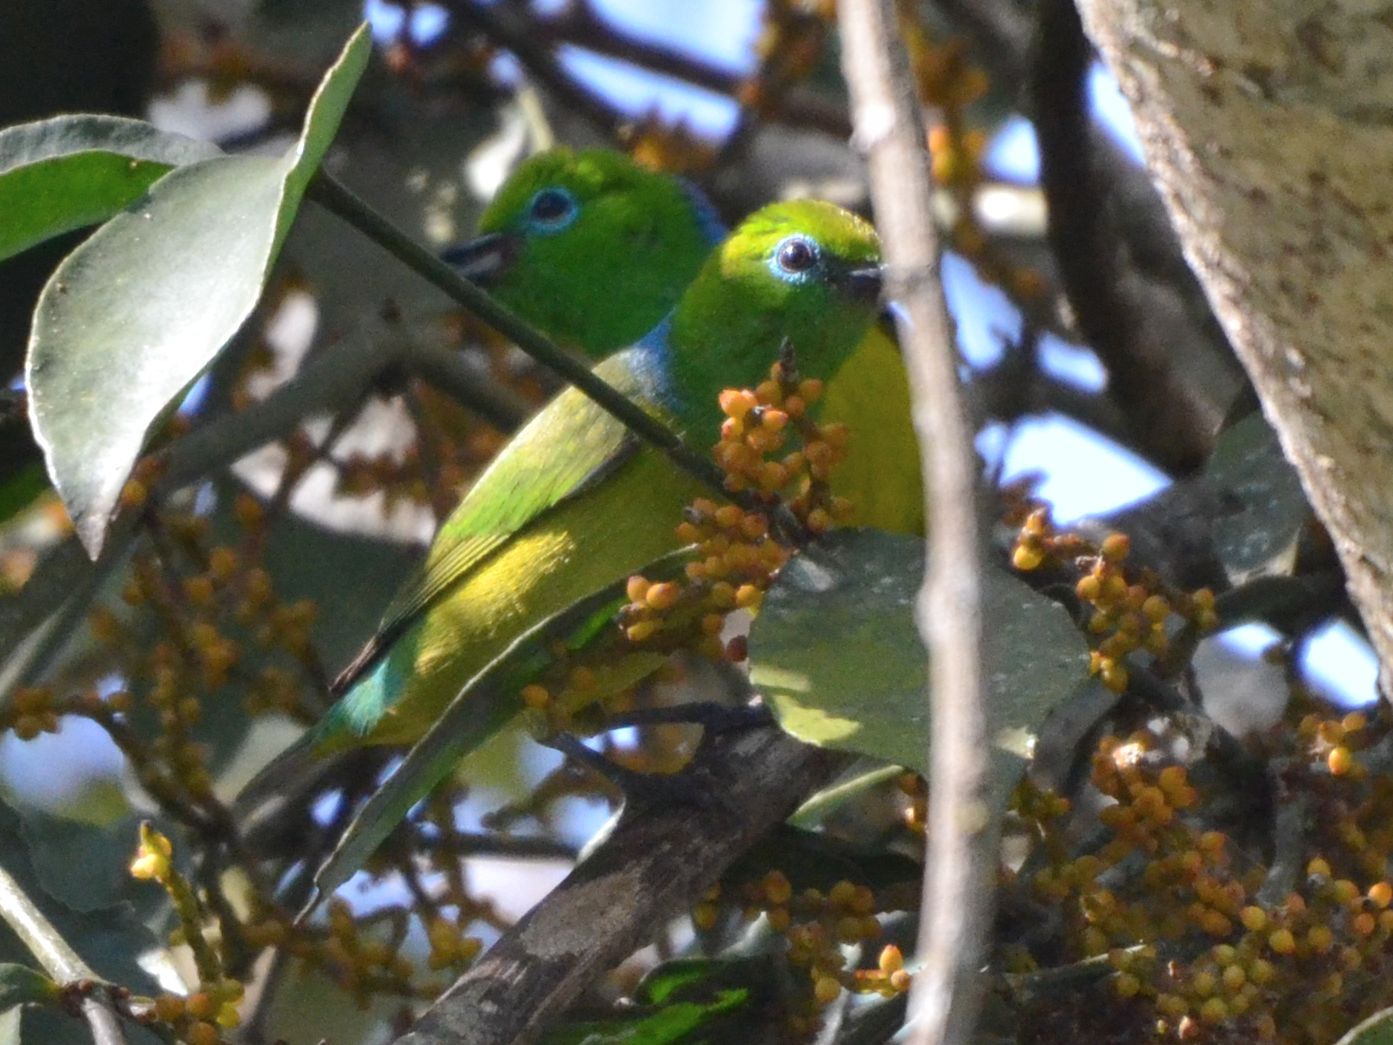 Click picture to see more Blue-naped Chlorophonias.